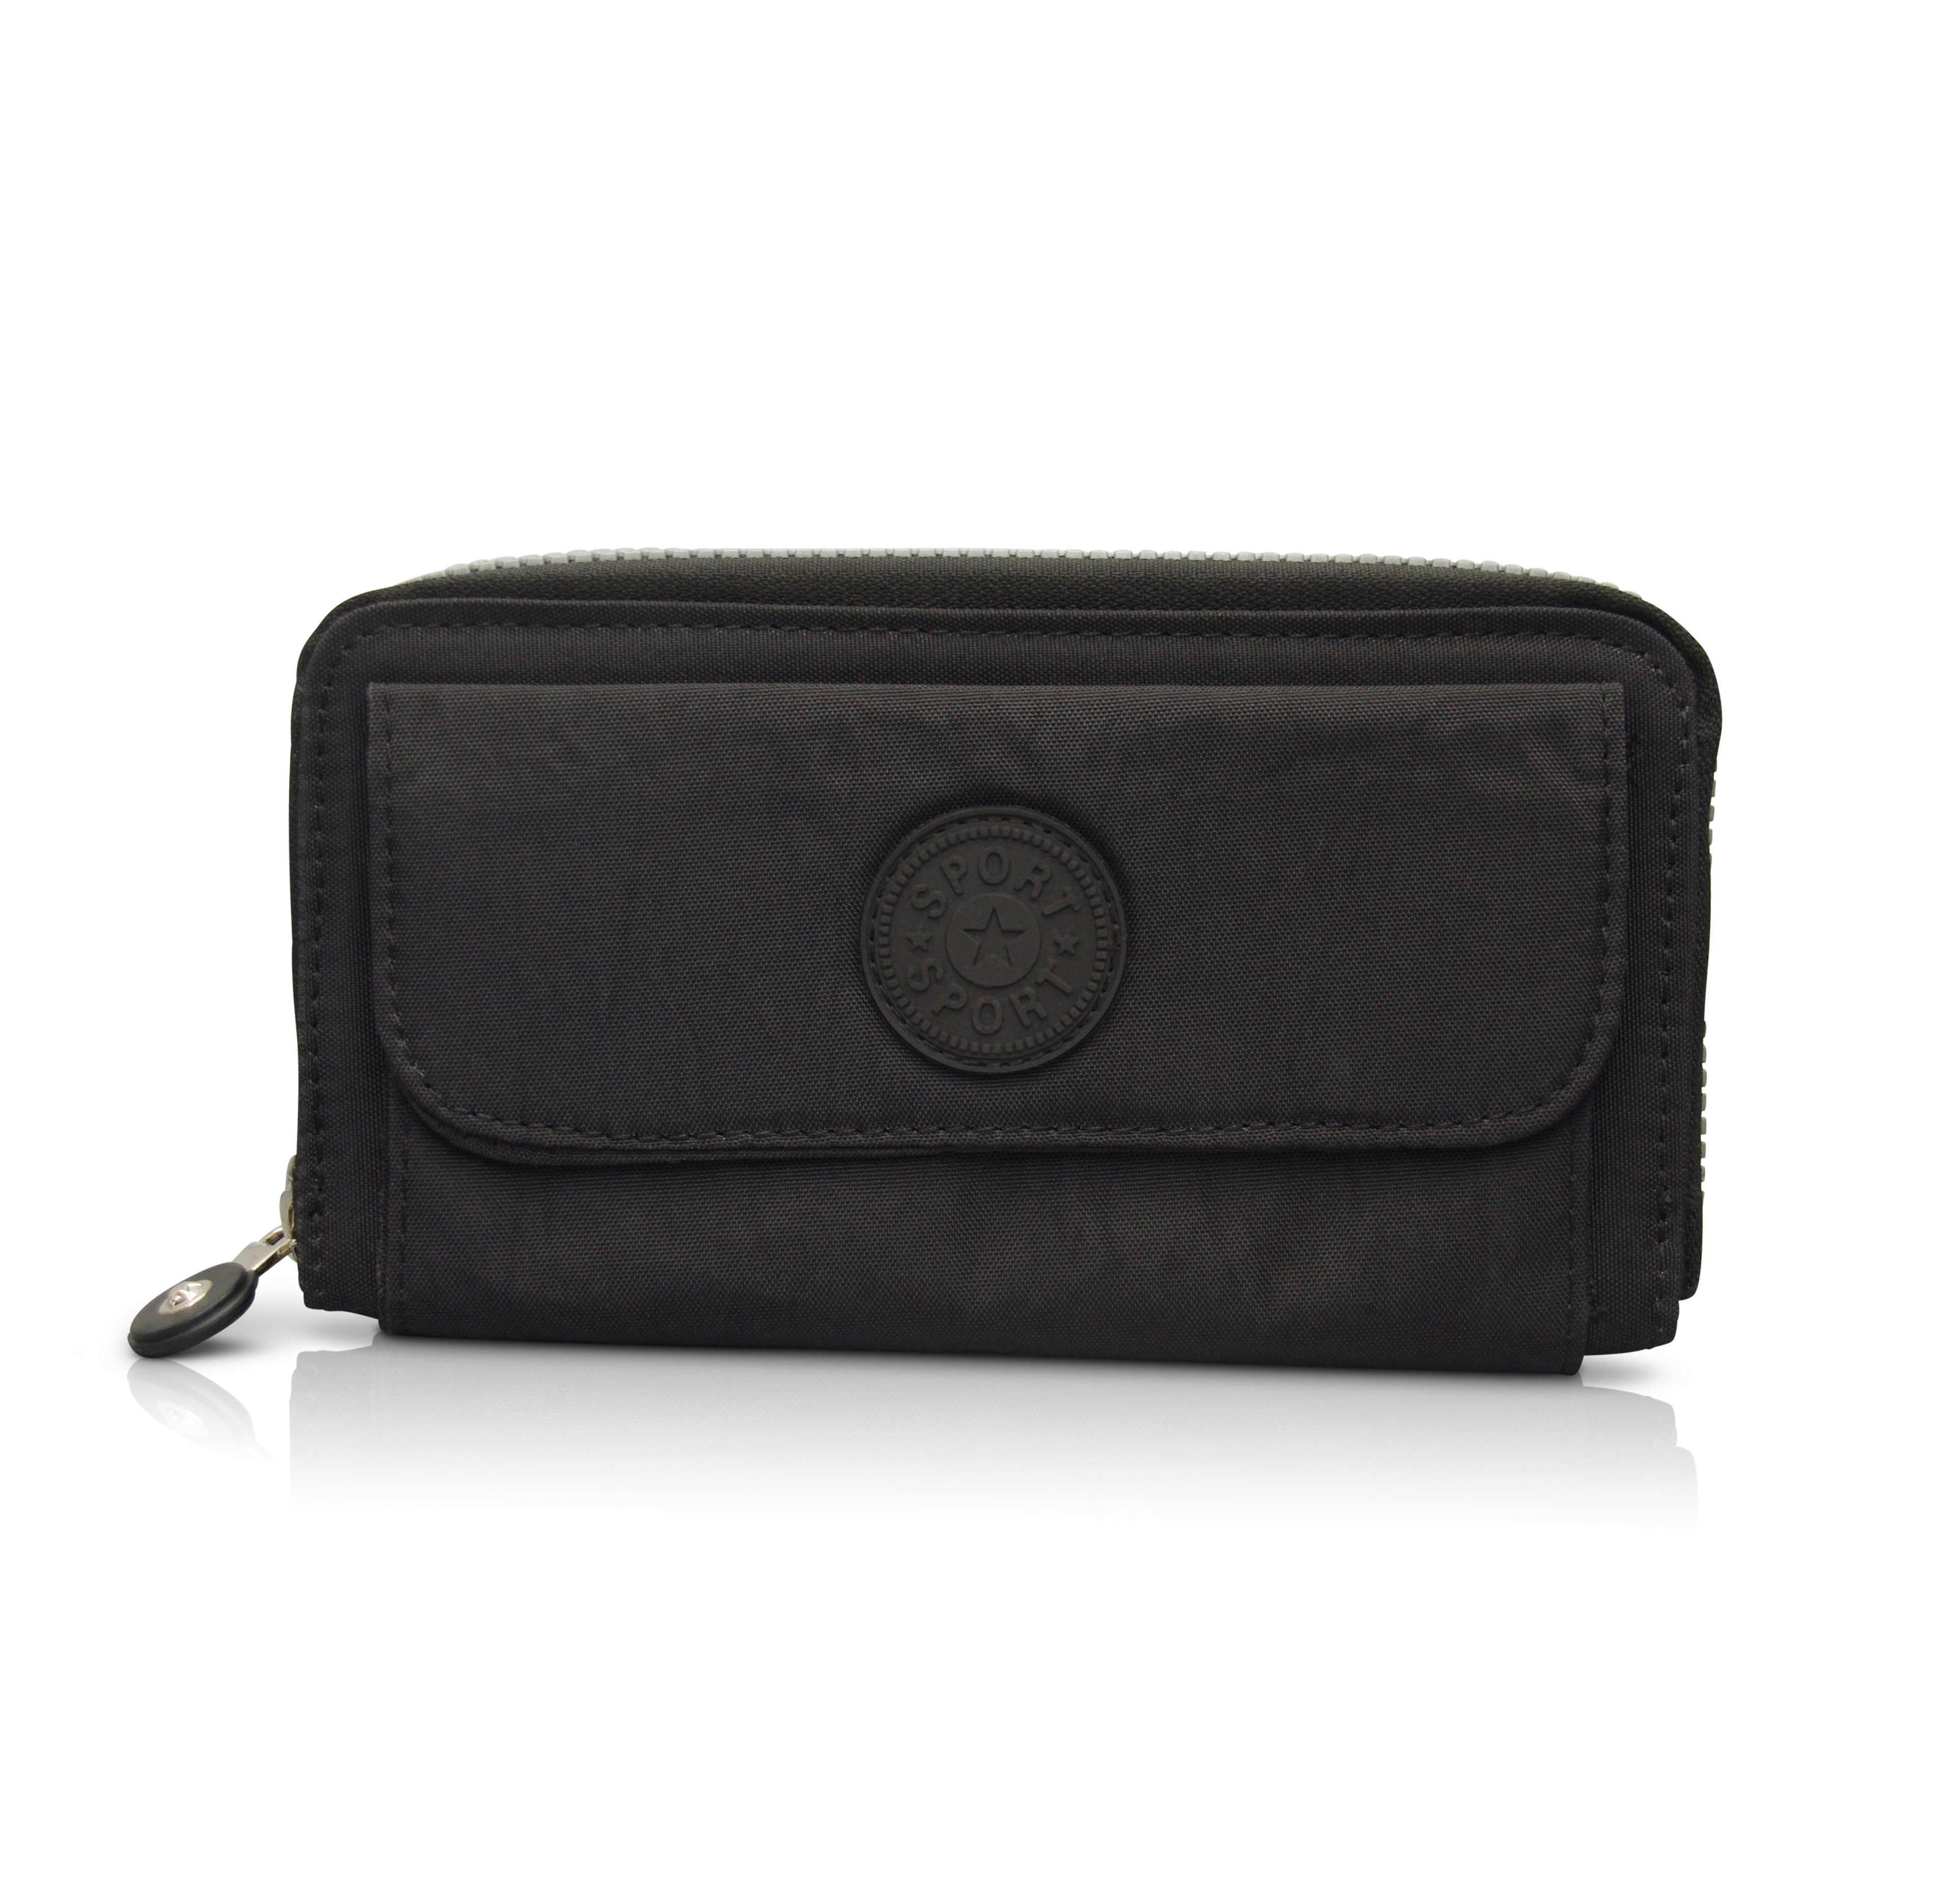 Cienna - KP19008 Large Zip Wallet with Phone Pouch - Black